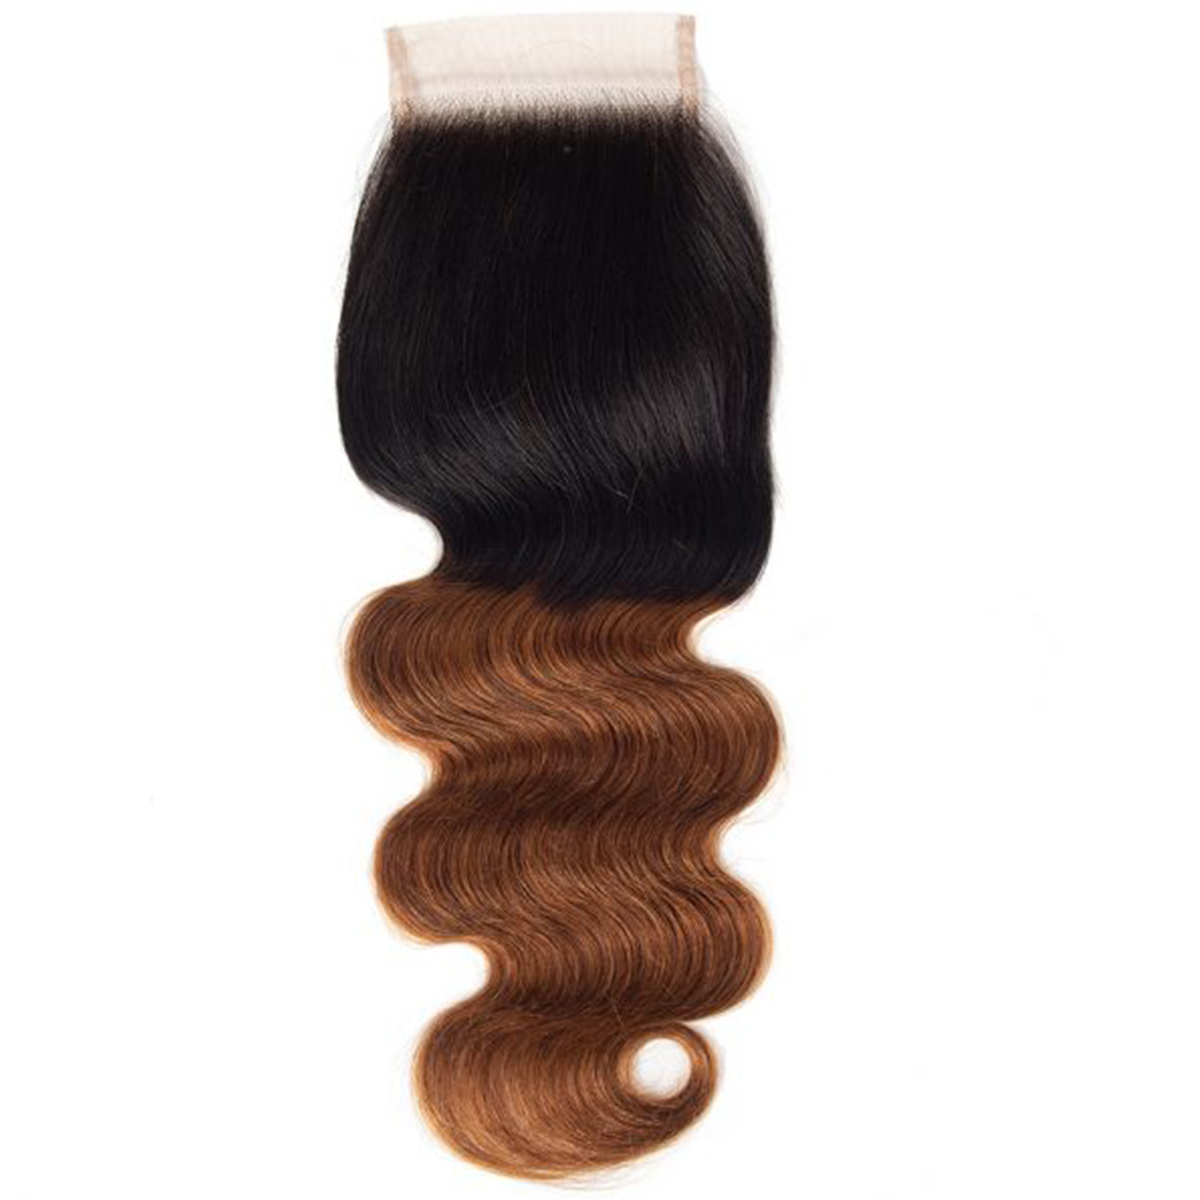 T1B/30 Body 4×4 Lace Closure Free/Middle/Three Part